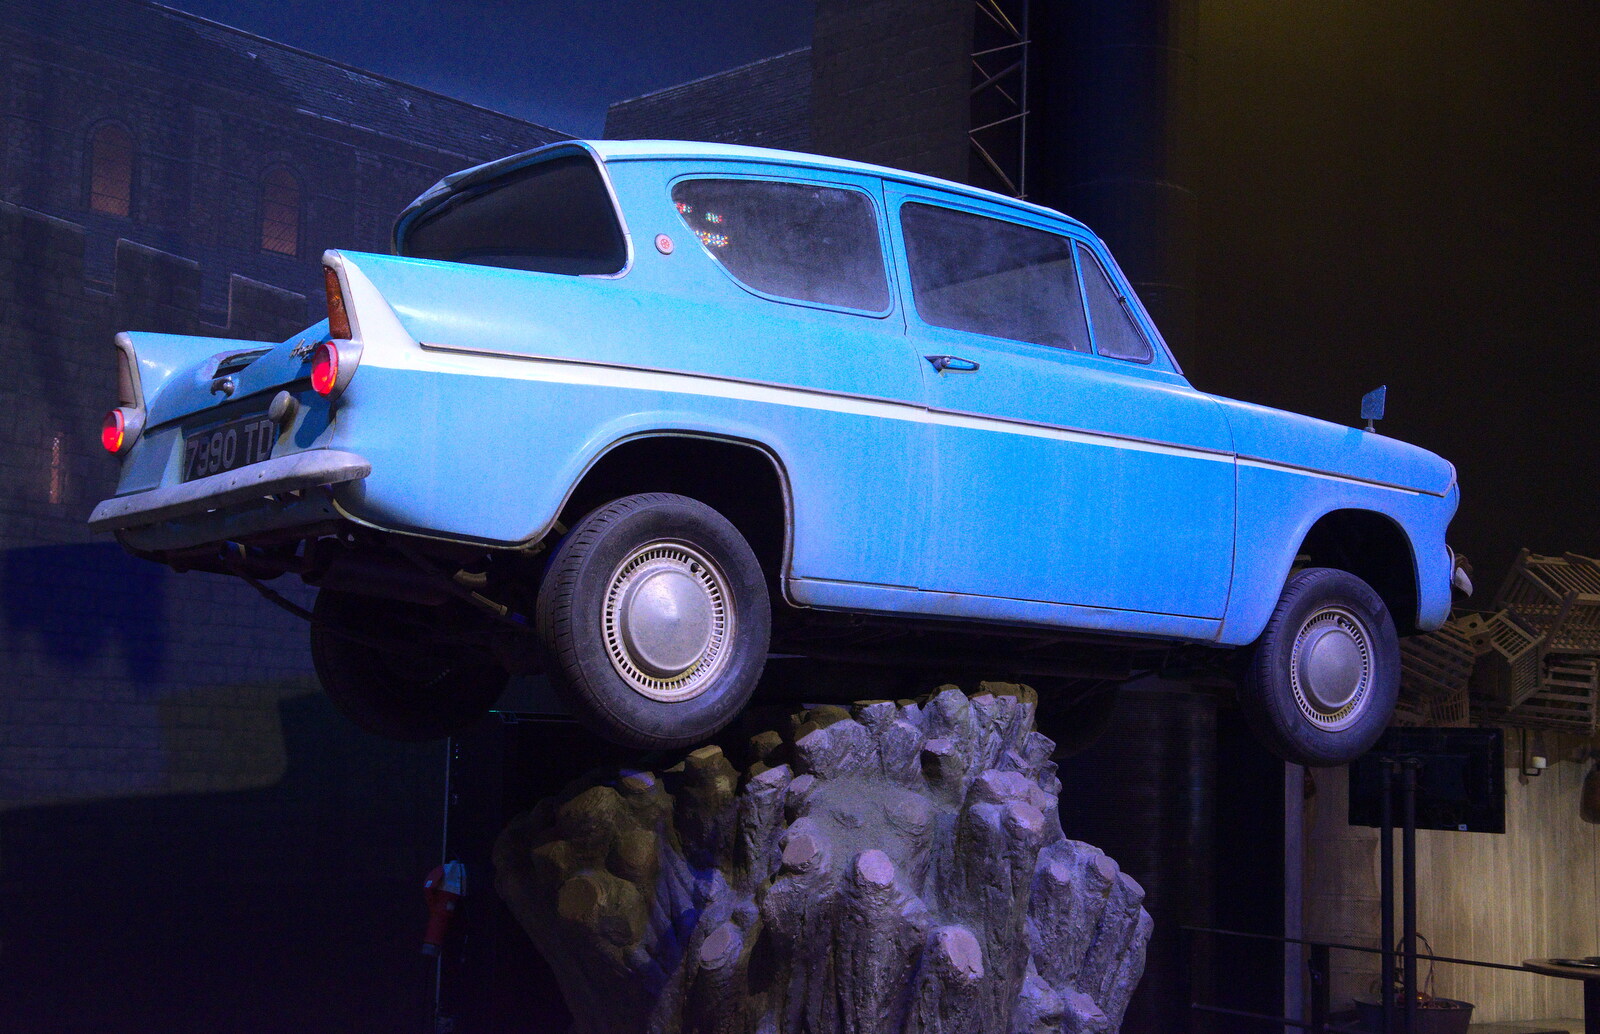 The Ford Anglia from A Trip to Harry Potter World, Leavesden, Hertfordshire - 16th February 2020